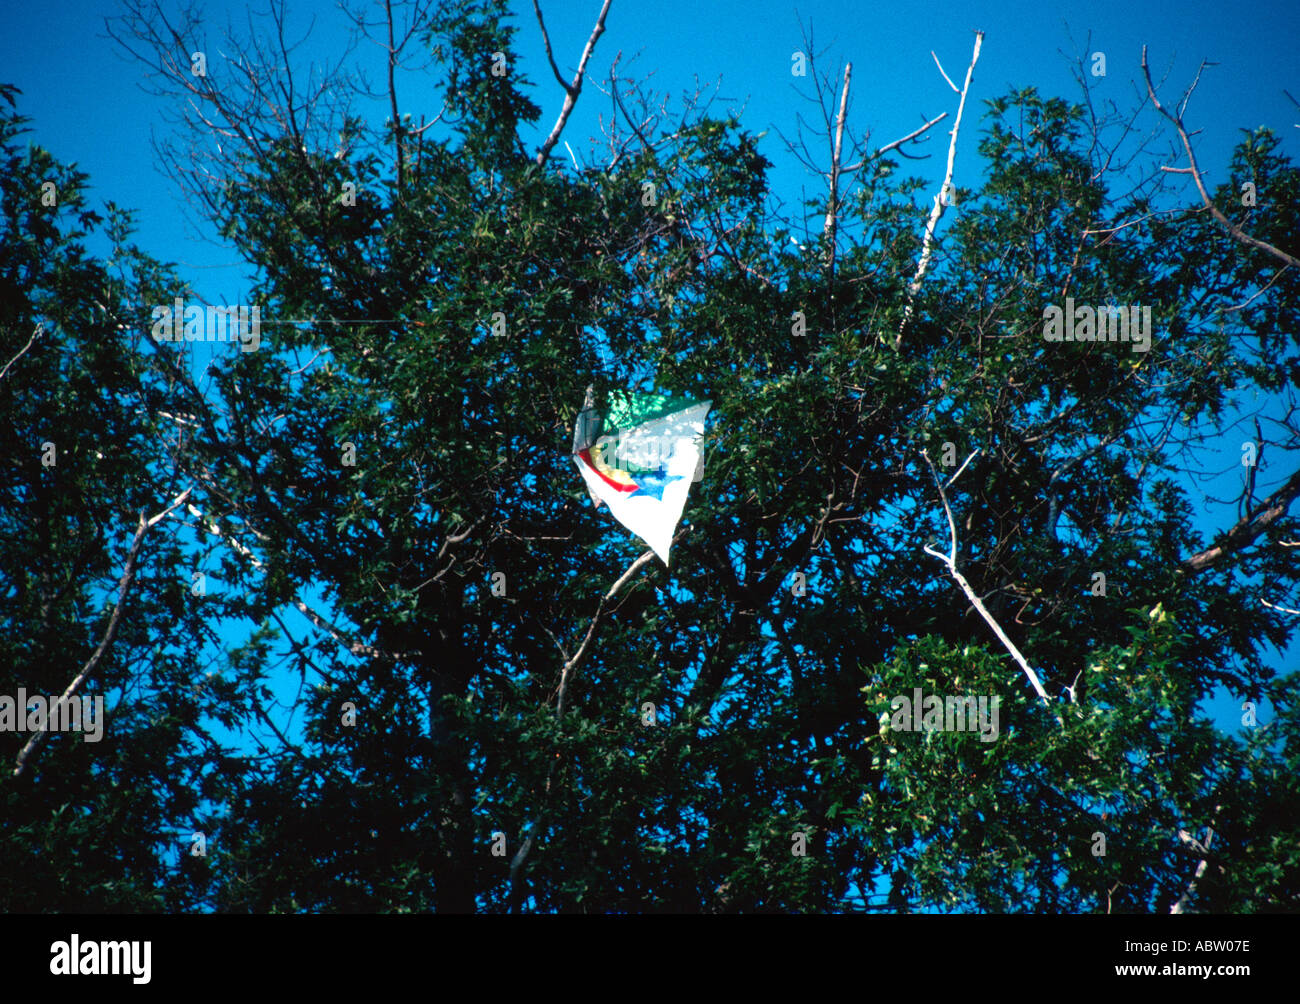 Flight aborted as kite gets caught in tree branches. Stock Photo